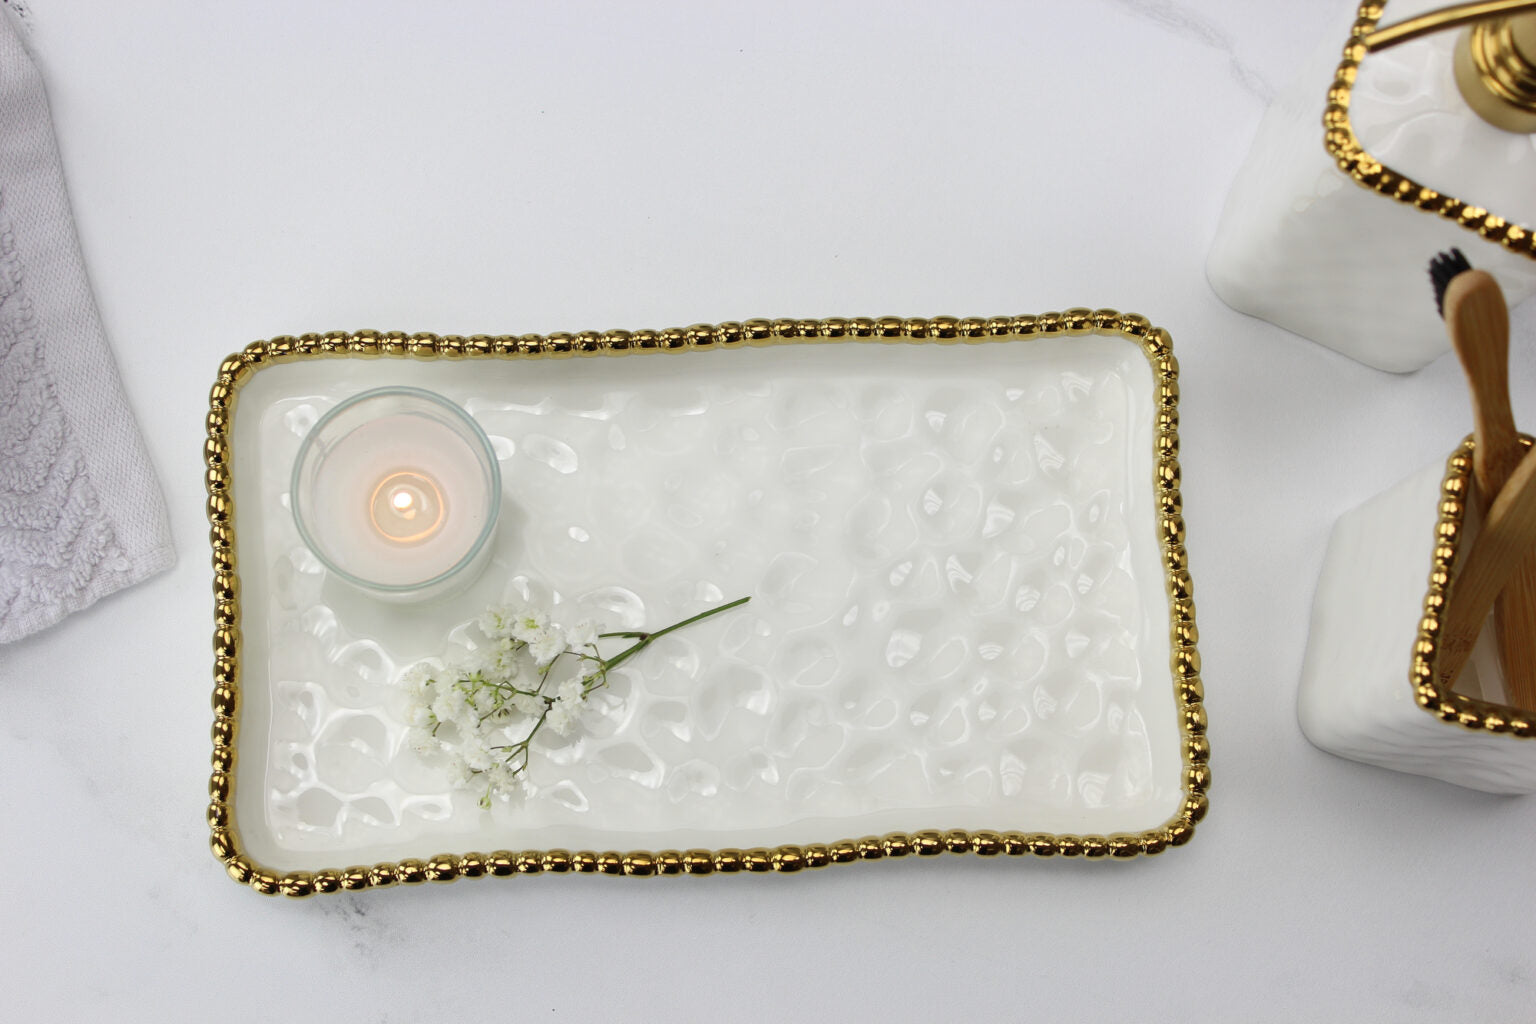 Pampa Bay Rectangular Vanity Tray With Gold Beads